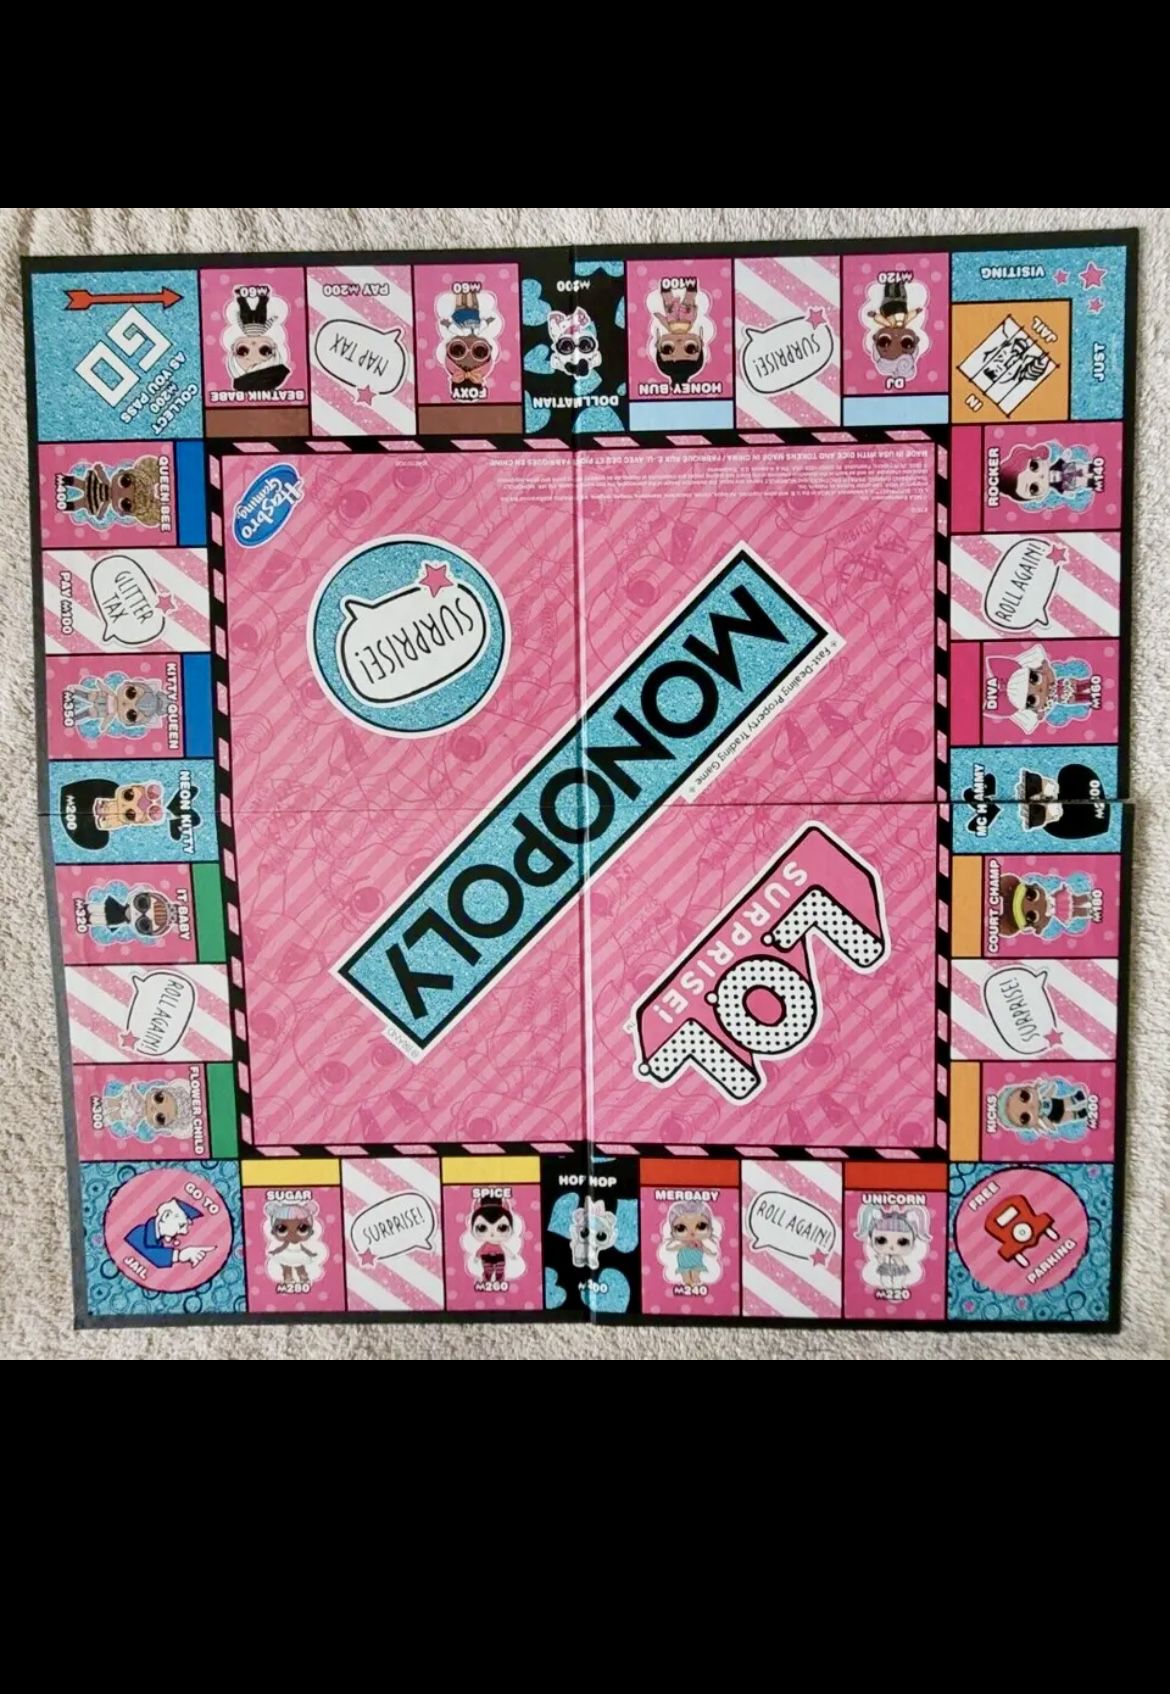 LOL SURPRISE  Monopoly Board Game New in Sealed Box by Hasbro Gaming New 